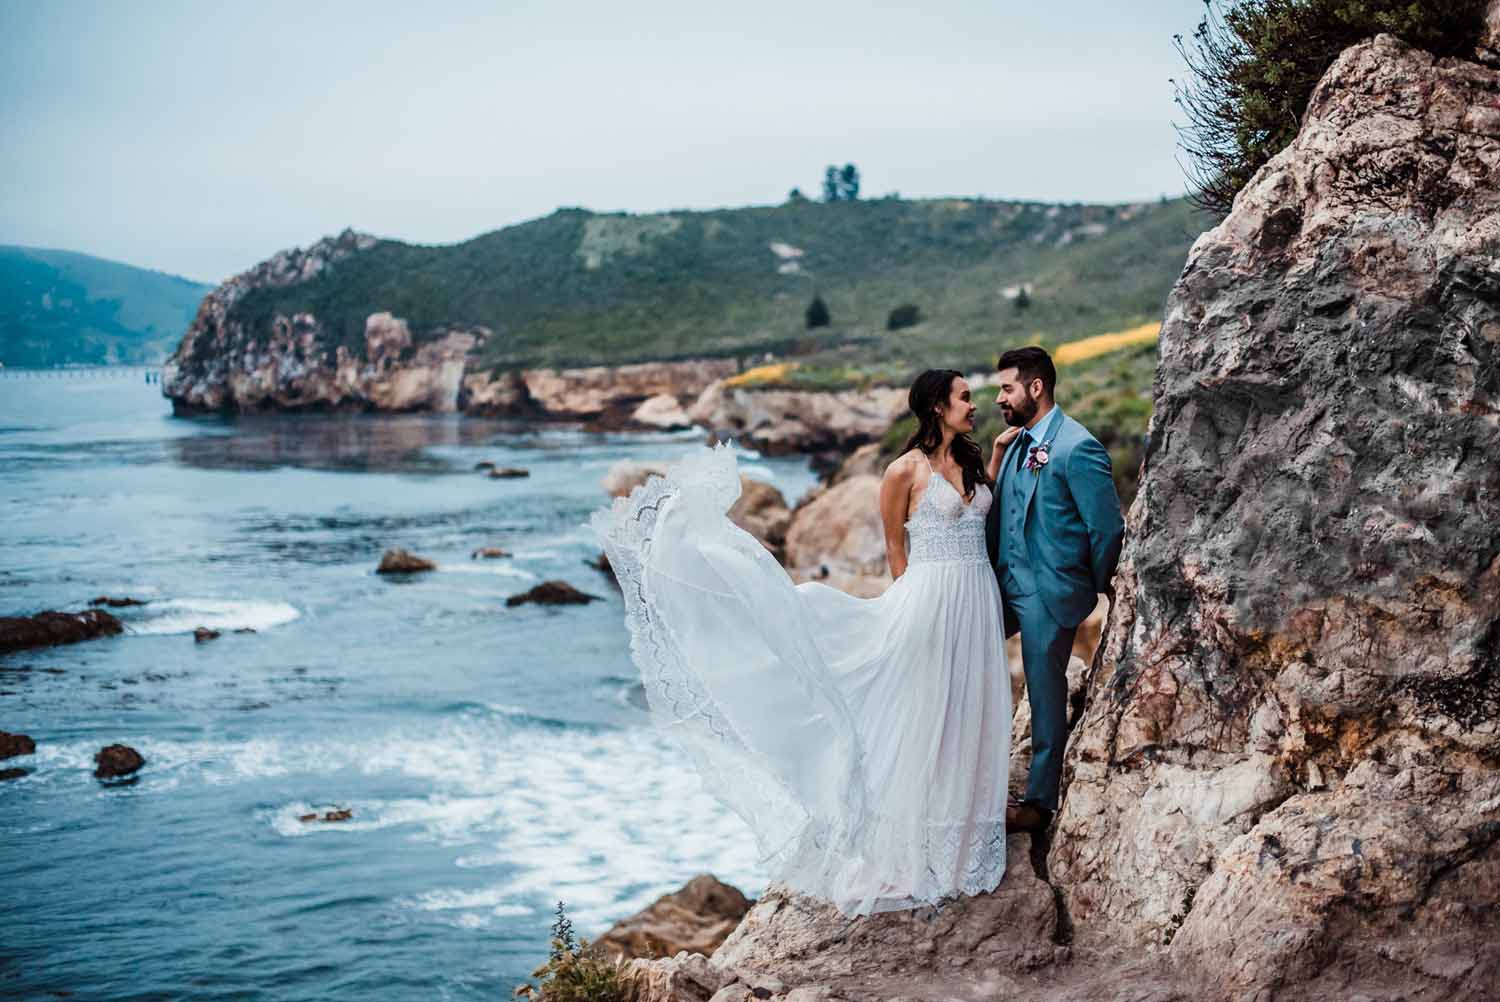 bride wearing the perfect elopement dress of sheer spaghetti strap and lace blowing in the wind while she and her groom stand oceanside perched on a cliff